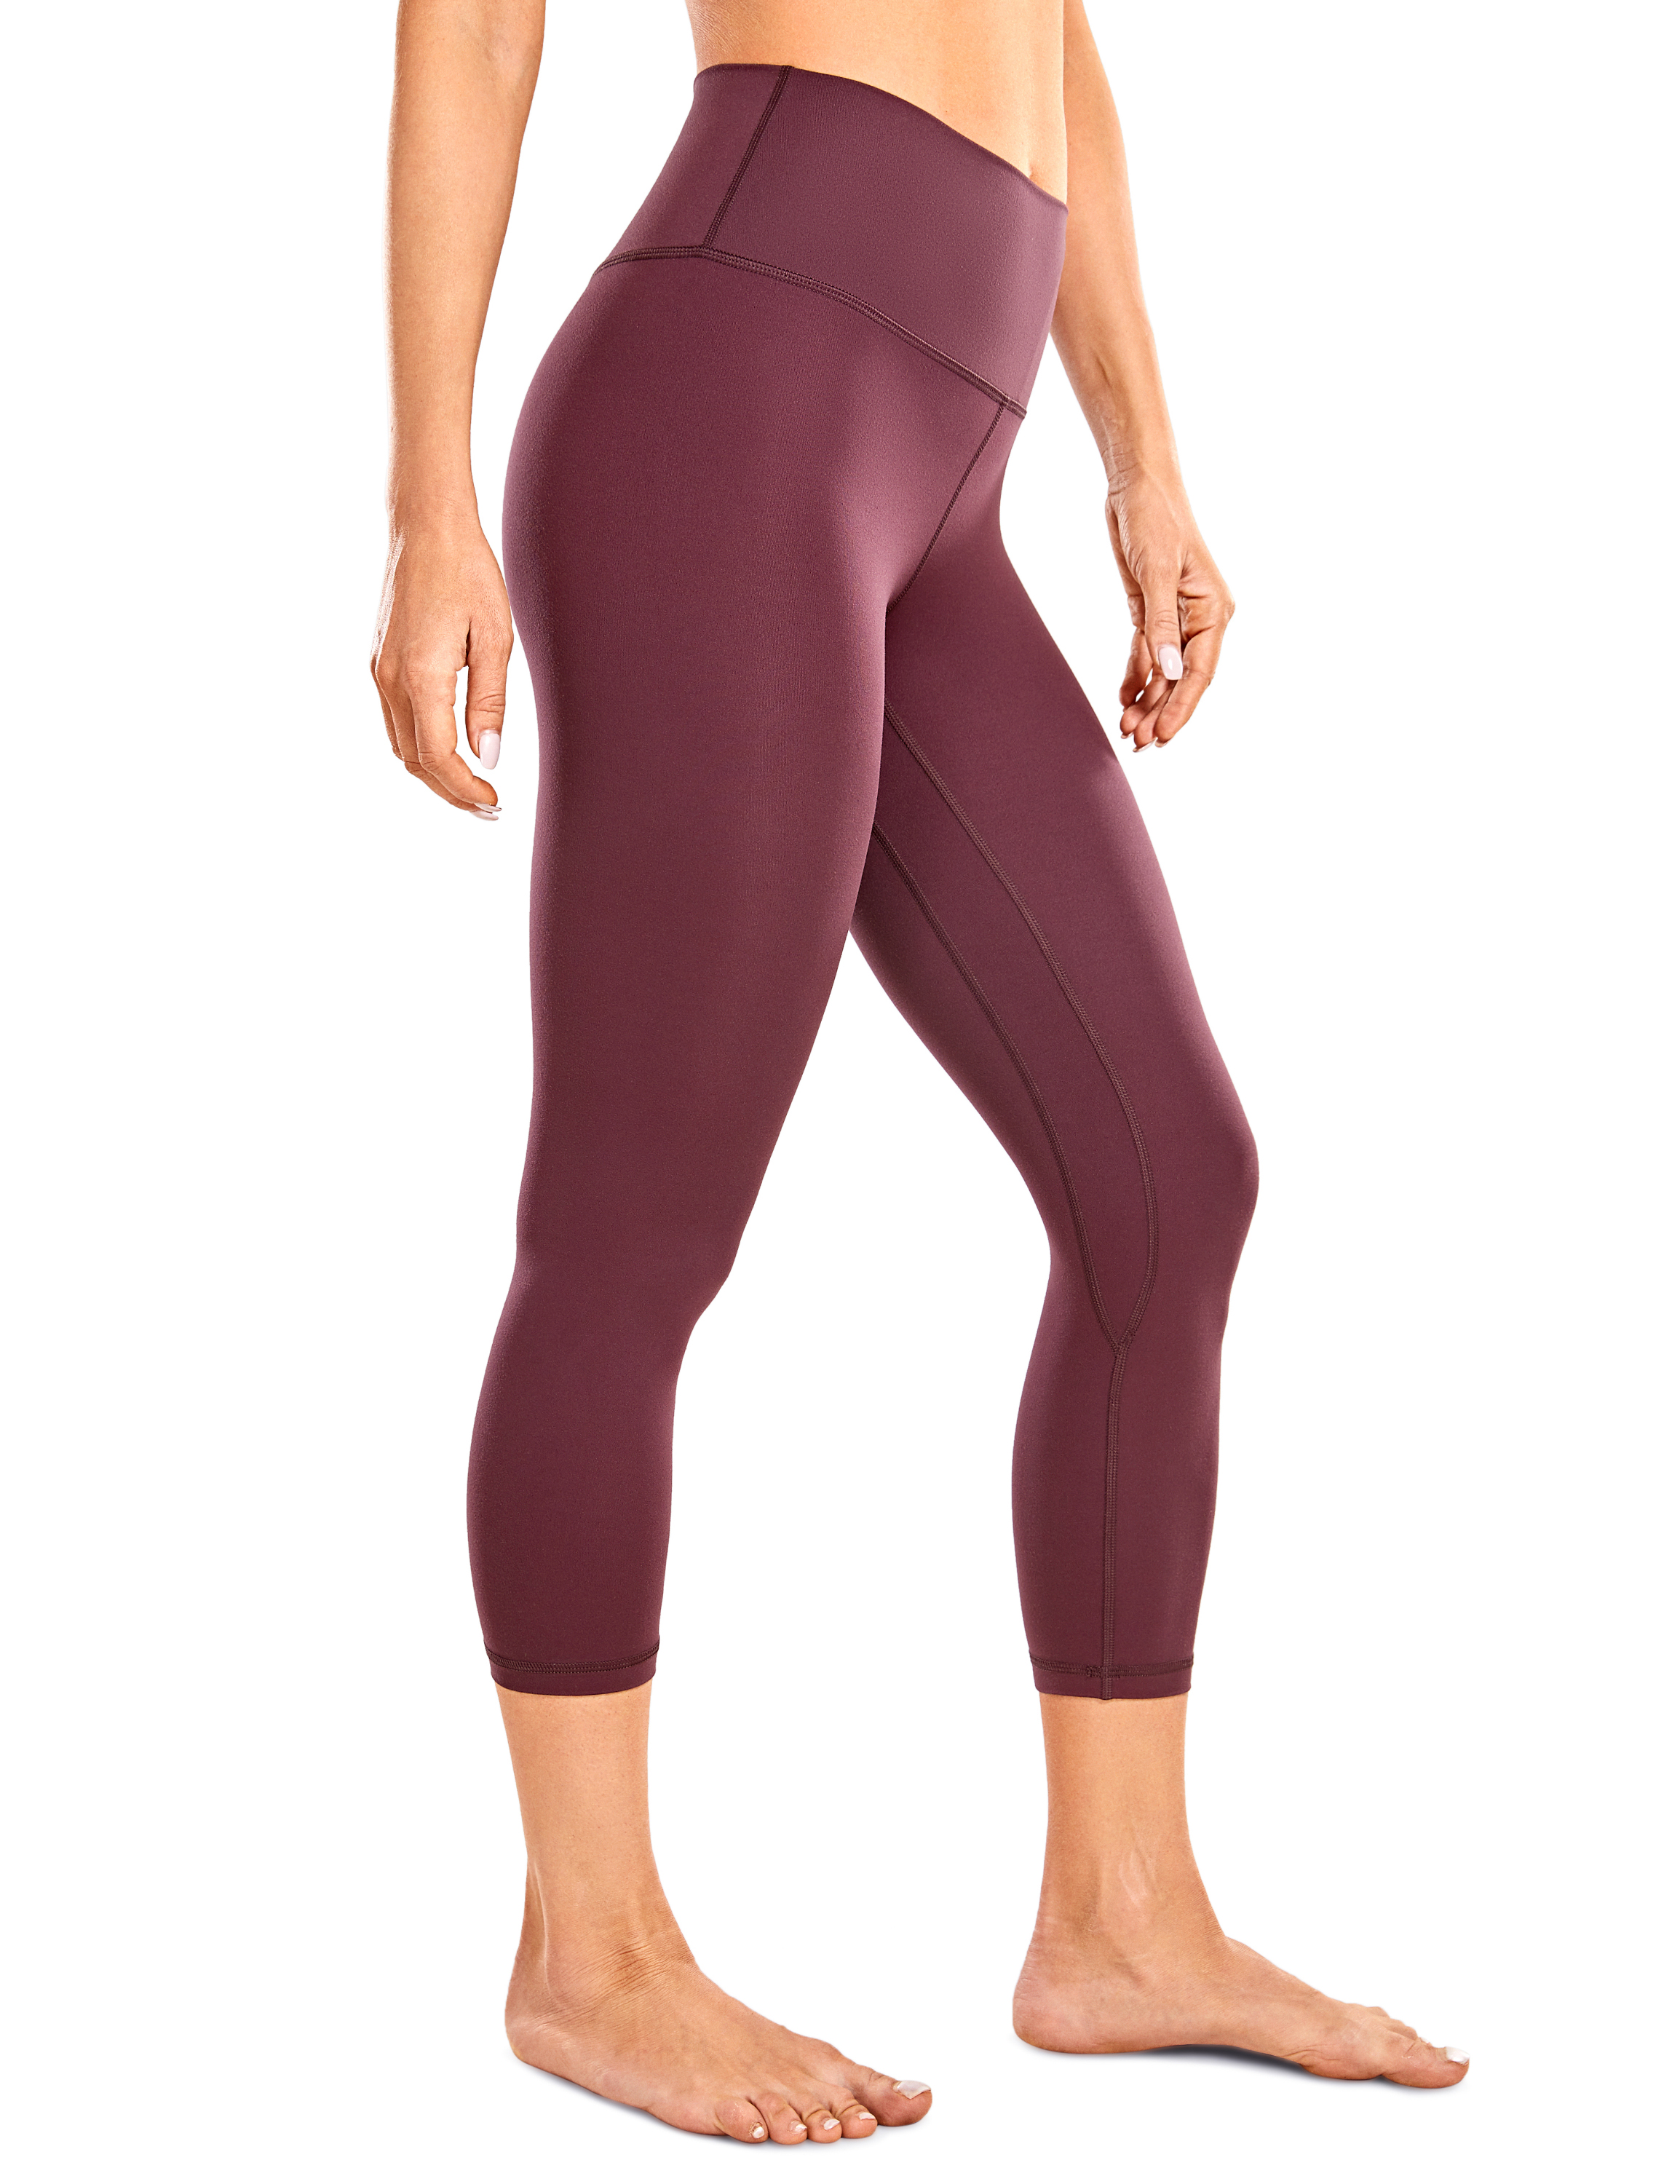 Pisexur High Waist Yoga Pants with Pockets, Workout Capris Leggings Naked  Feeling Tummy Control Workout Running Yoga Leggings for Women with Pocket  on Clearance 